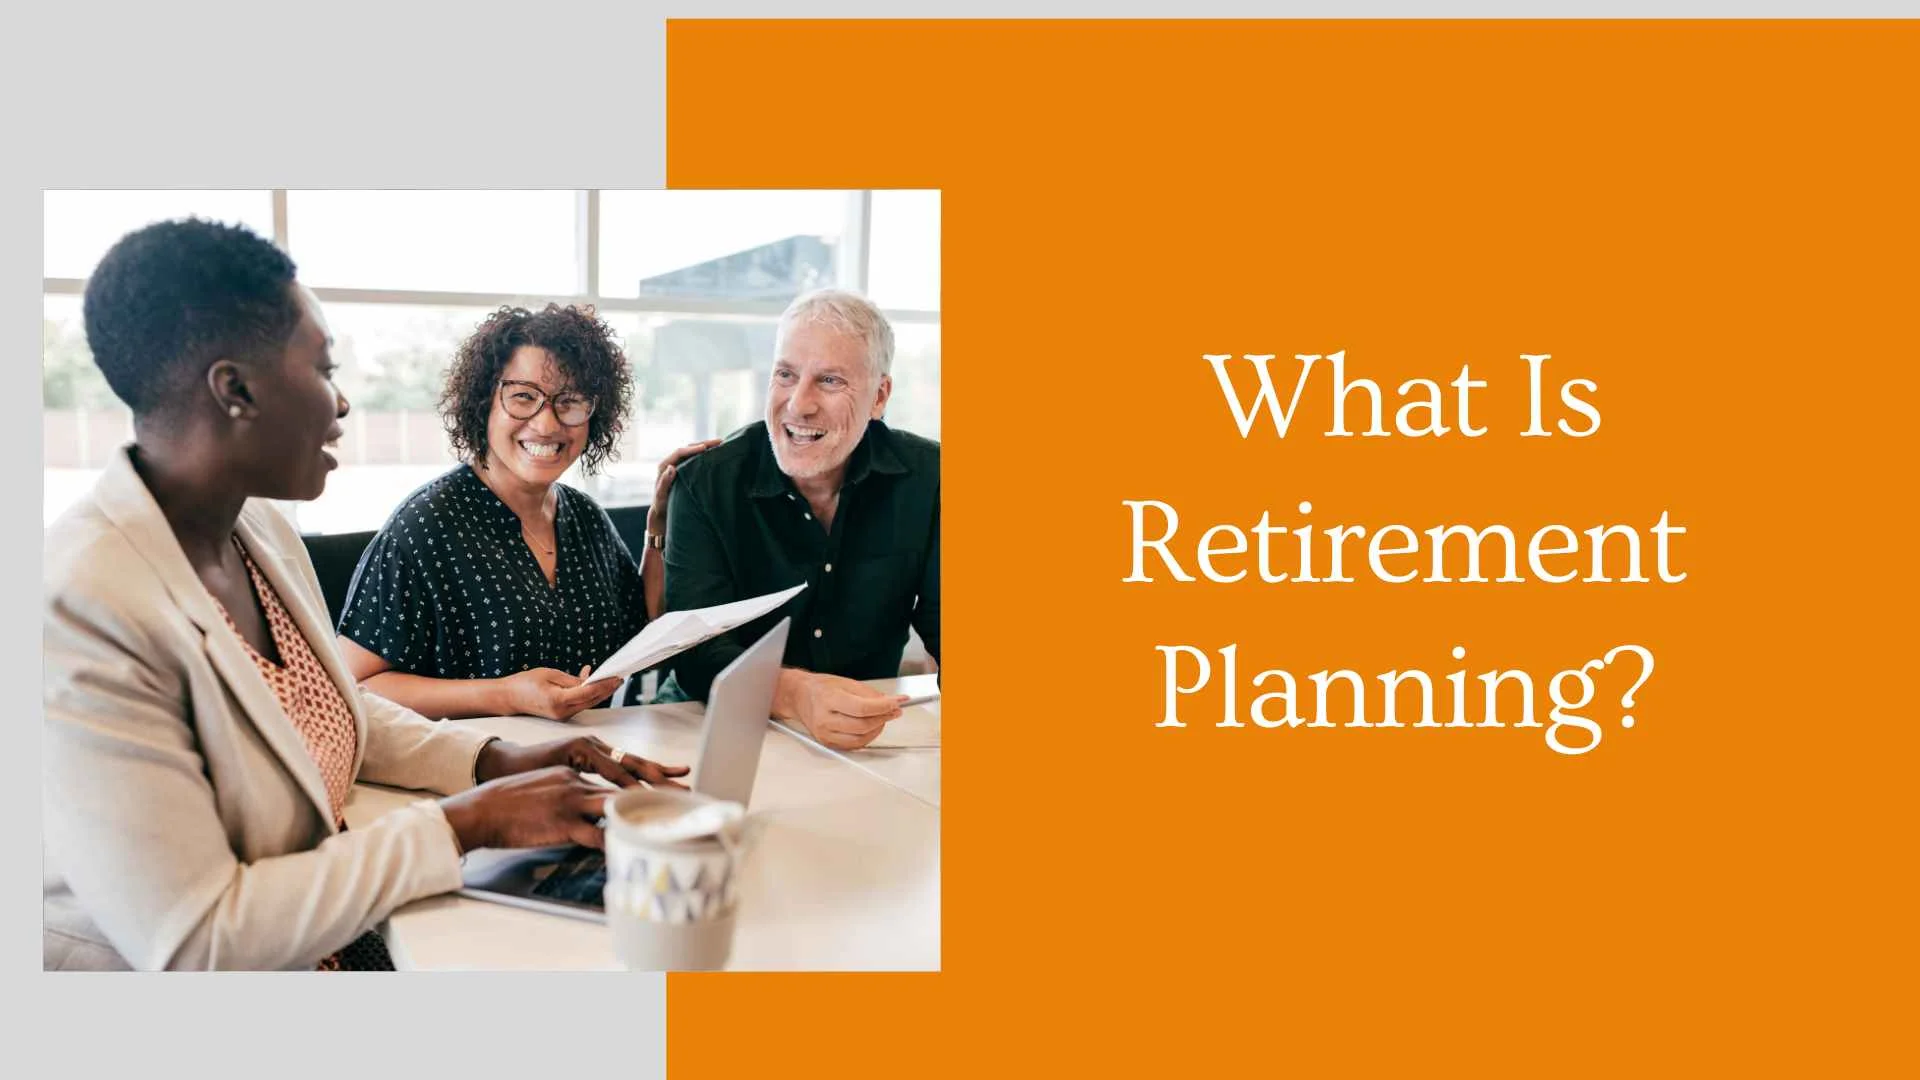 What Is Retirement Planning